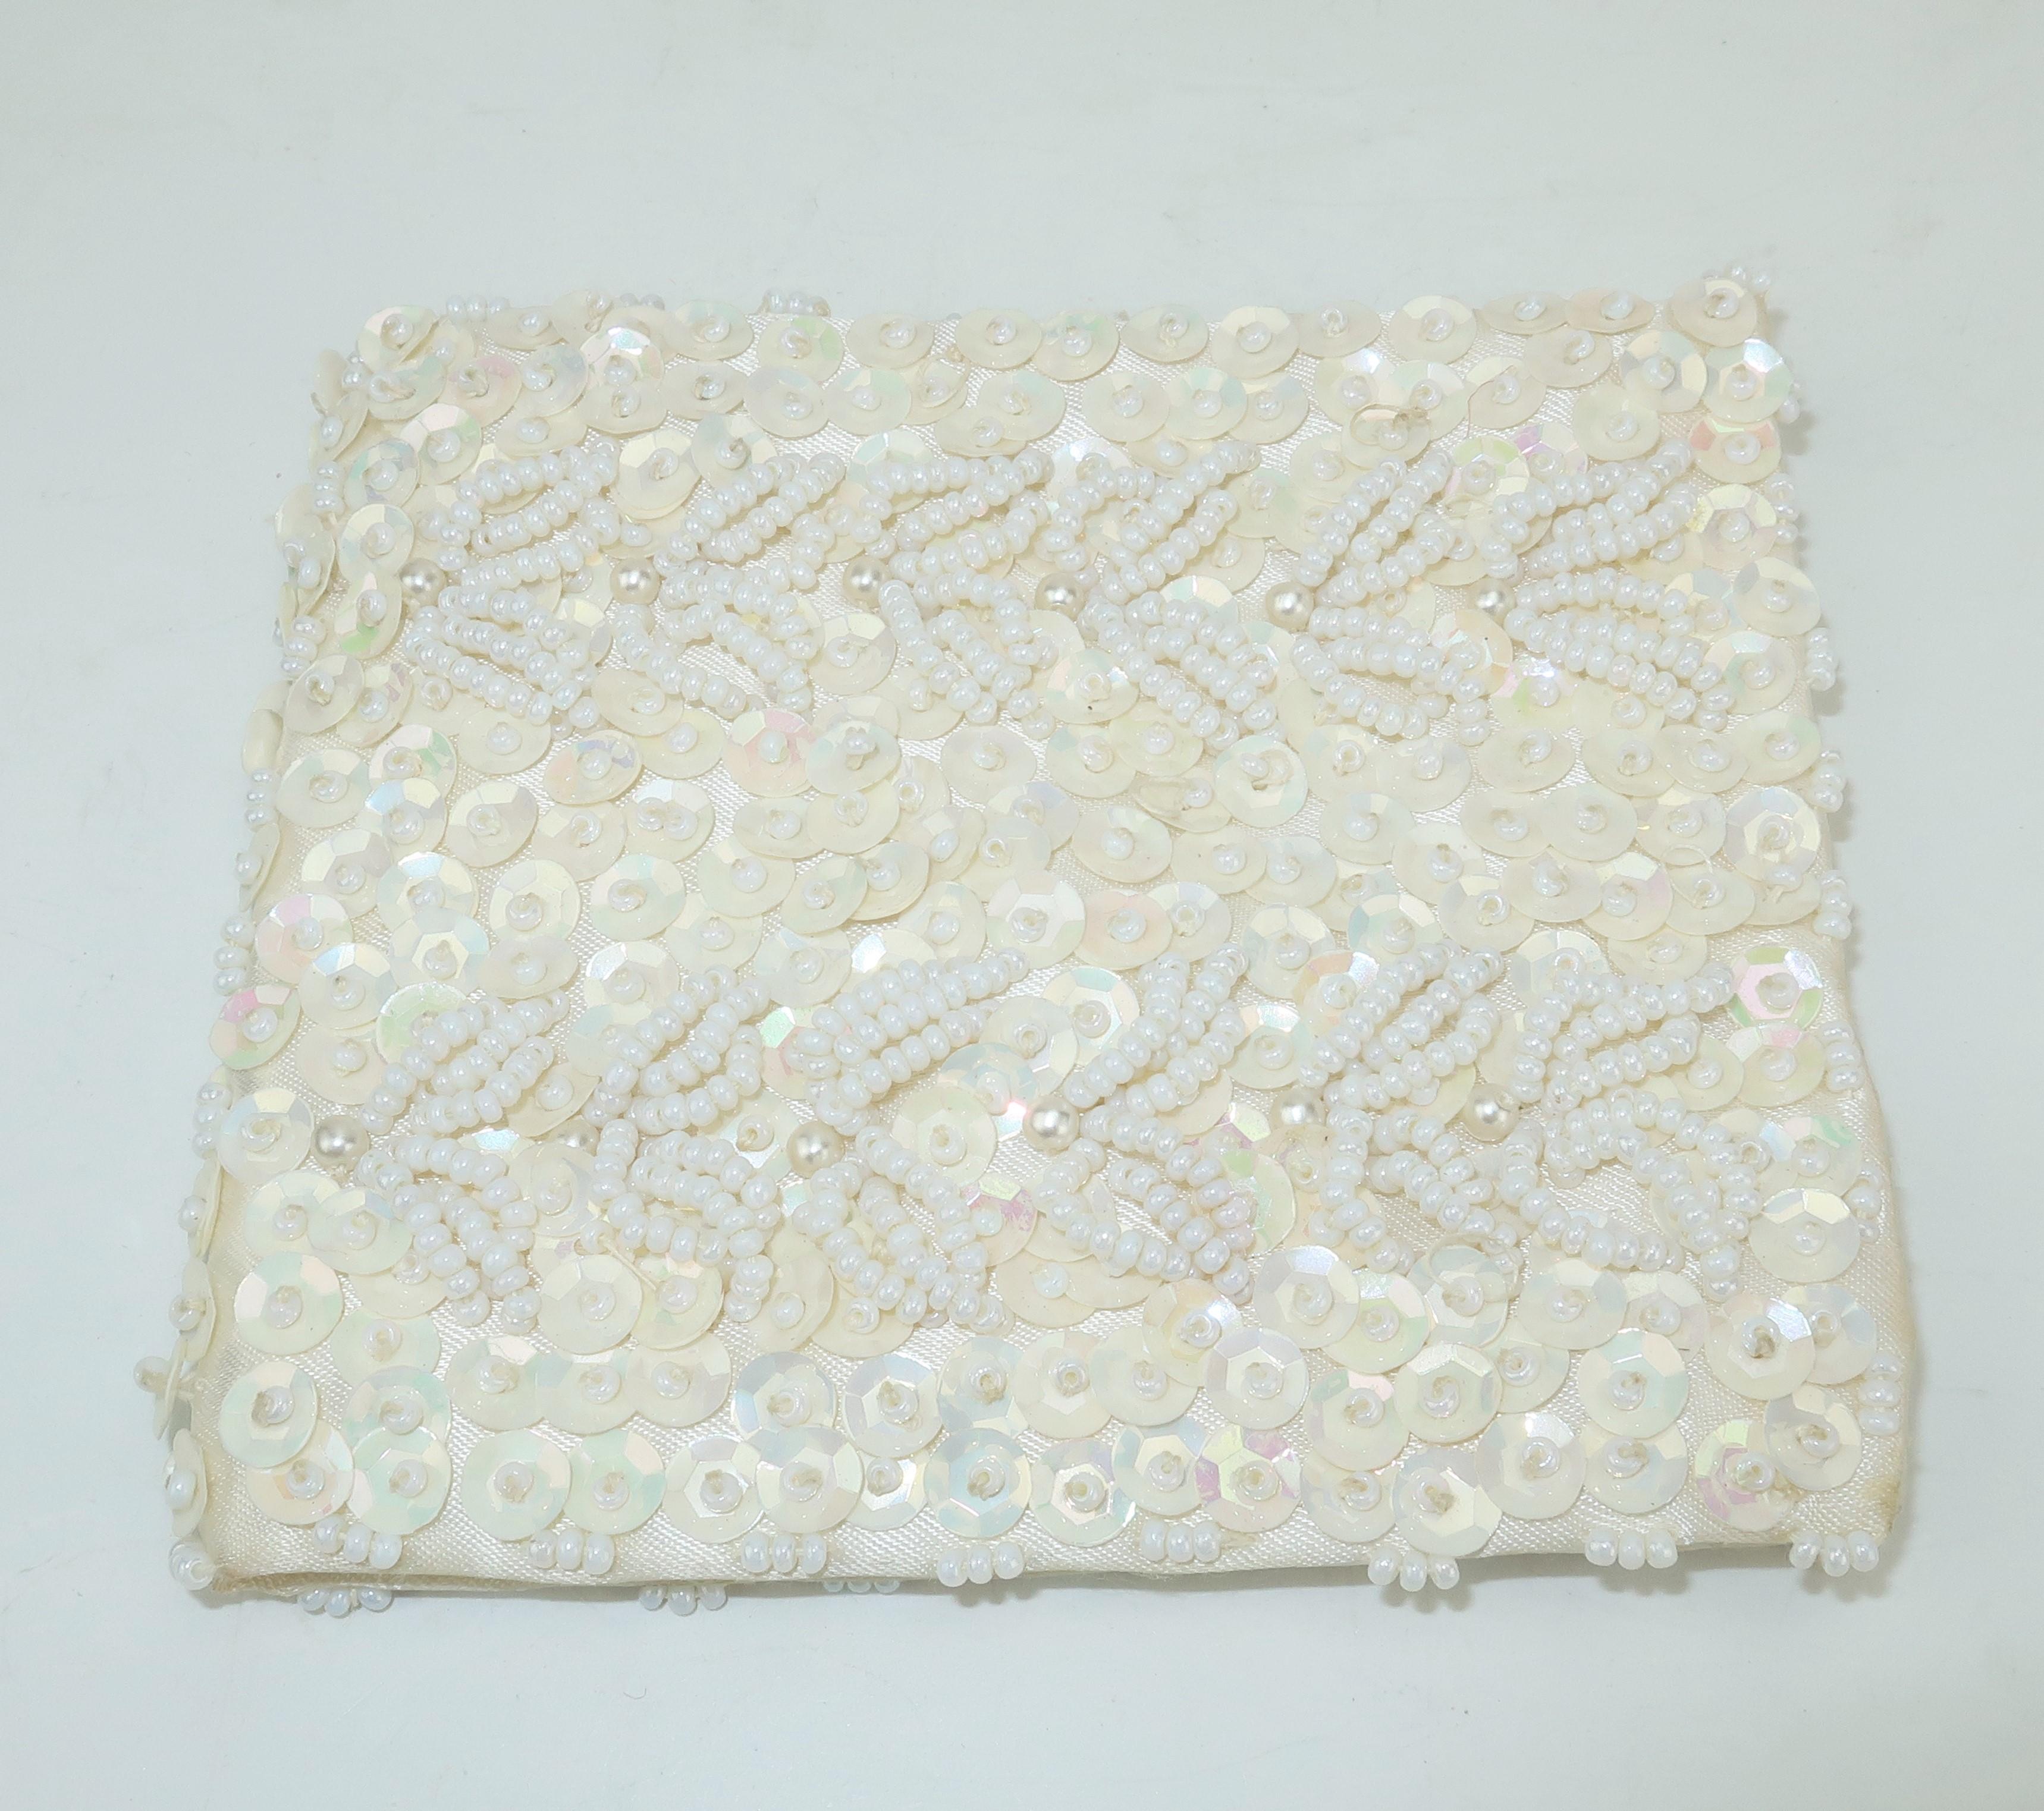 Hilde Walborg founded her company in the 1940's and was always in search of the best handmade beading for her designs.  This matching set consists of an evening wallet and glasses case fully embellished with white seed beads and sequins in a floral